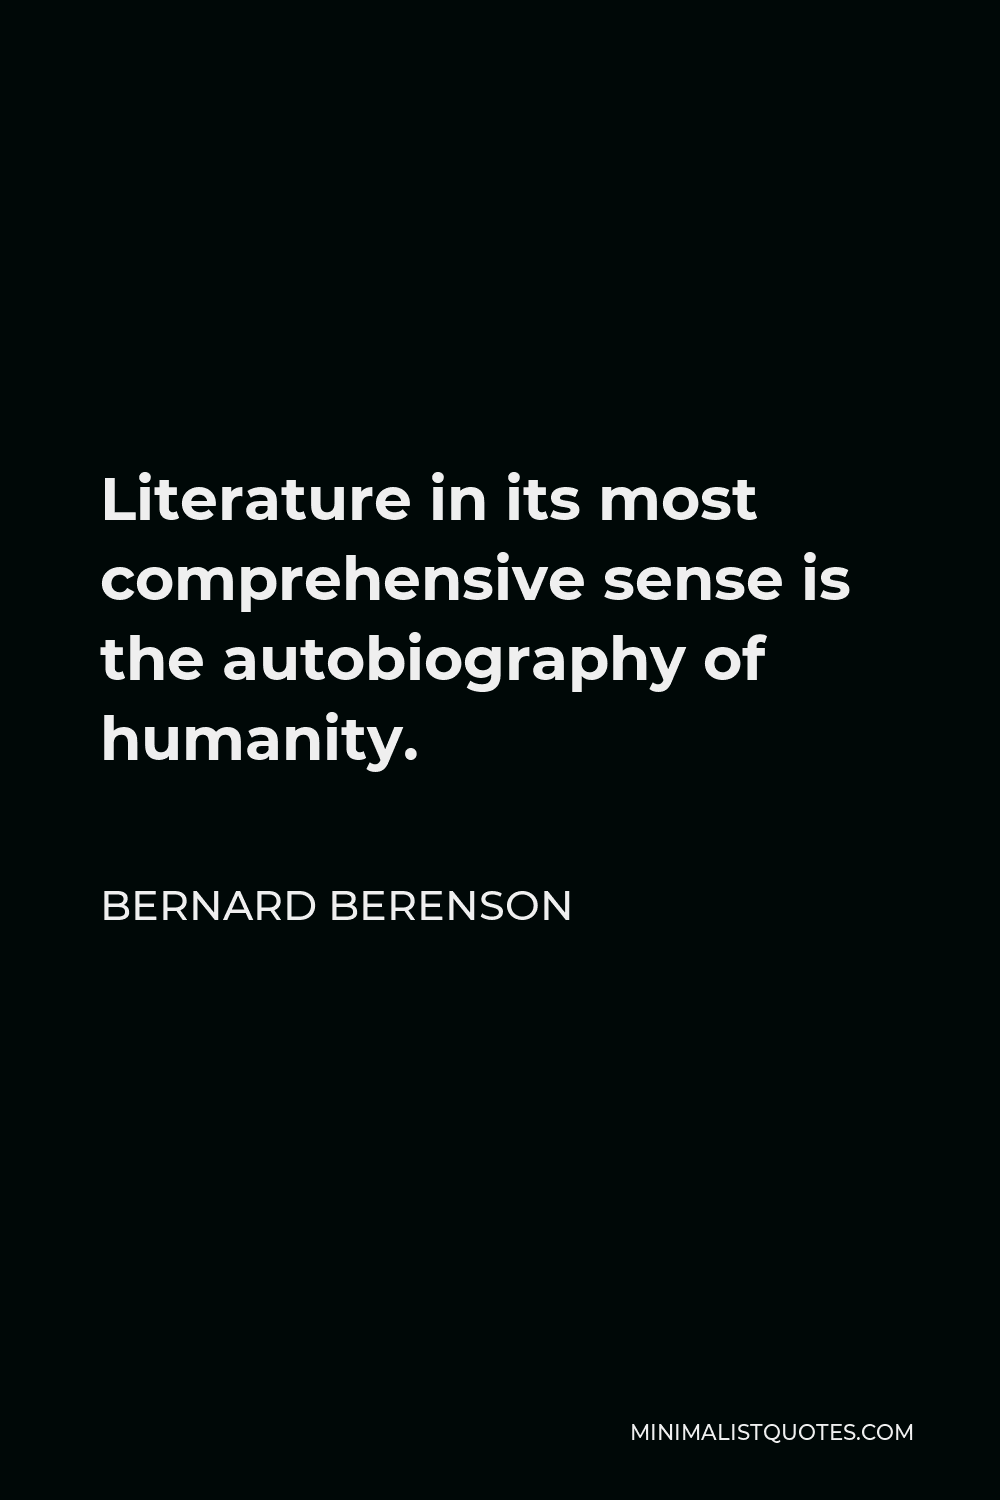 Bernard Berenson Quote - Literature in its most comprehensive sense is the autobiography of humanity.